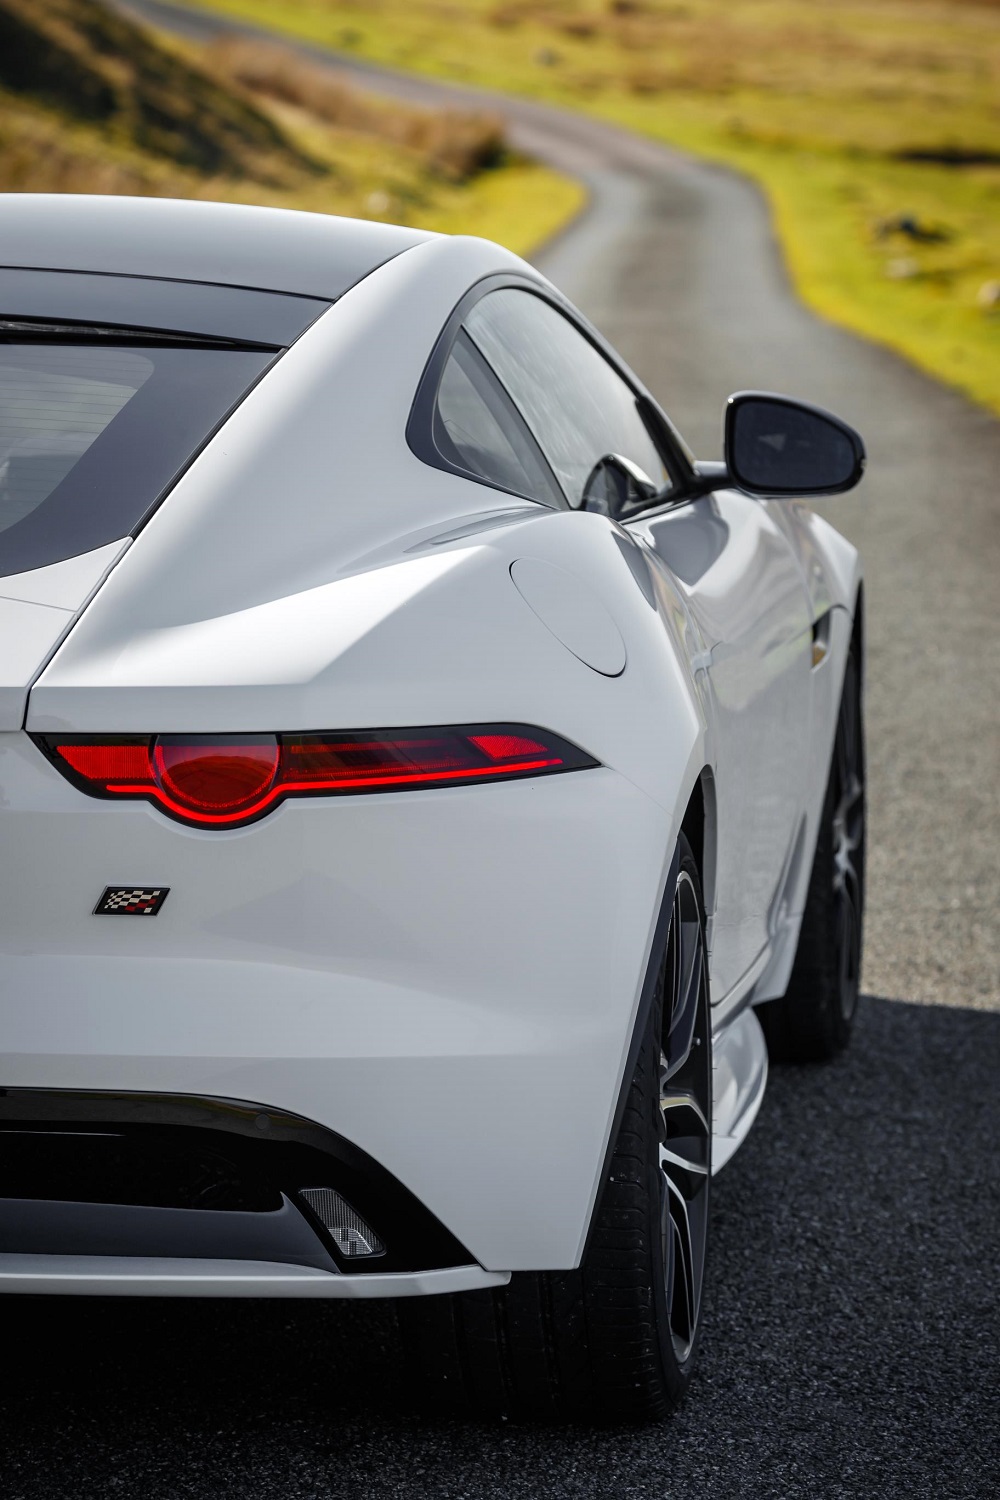 Jaguar F-Type 2020 Checkered Flag Limited Edition